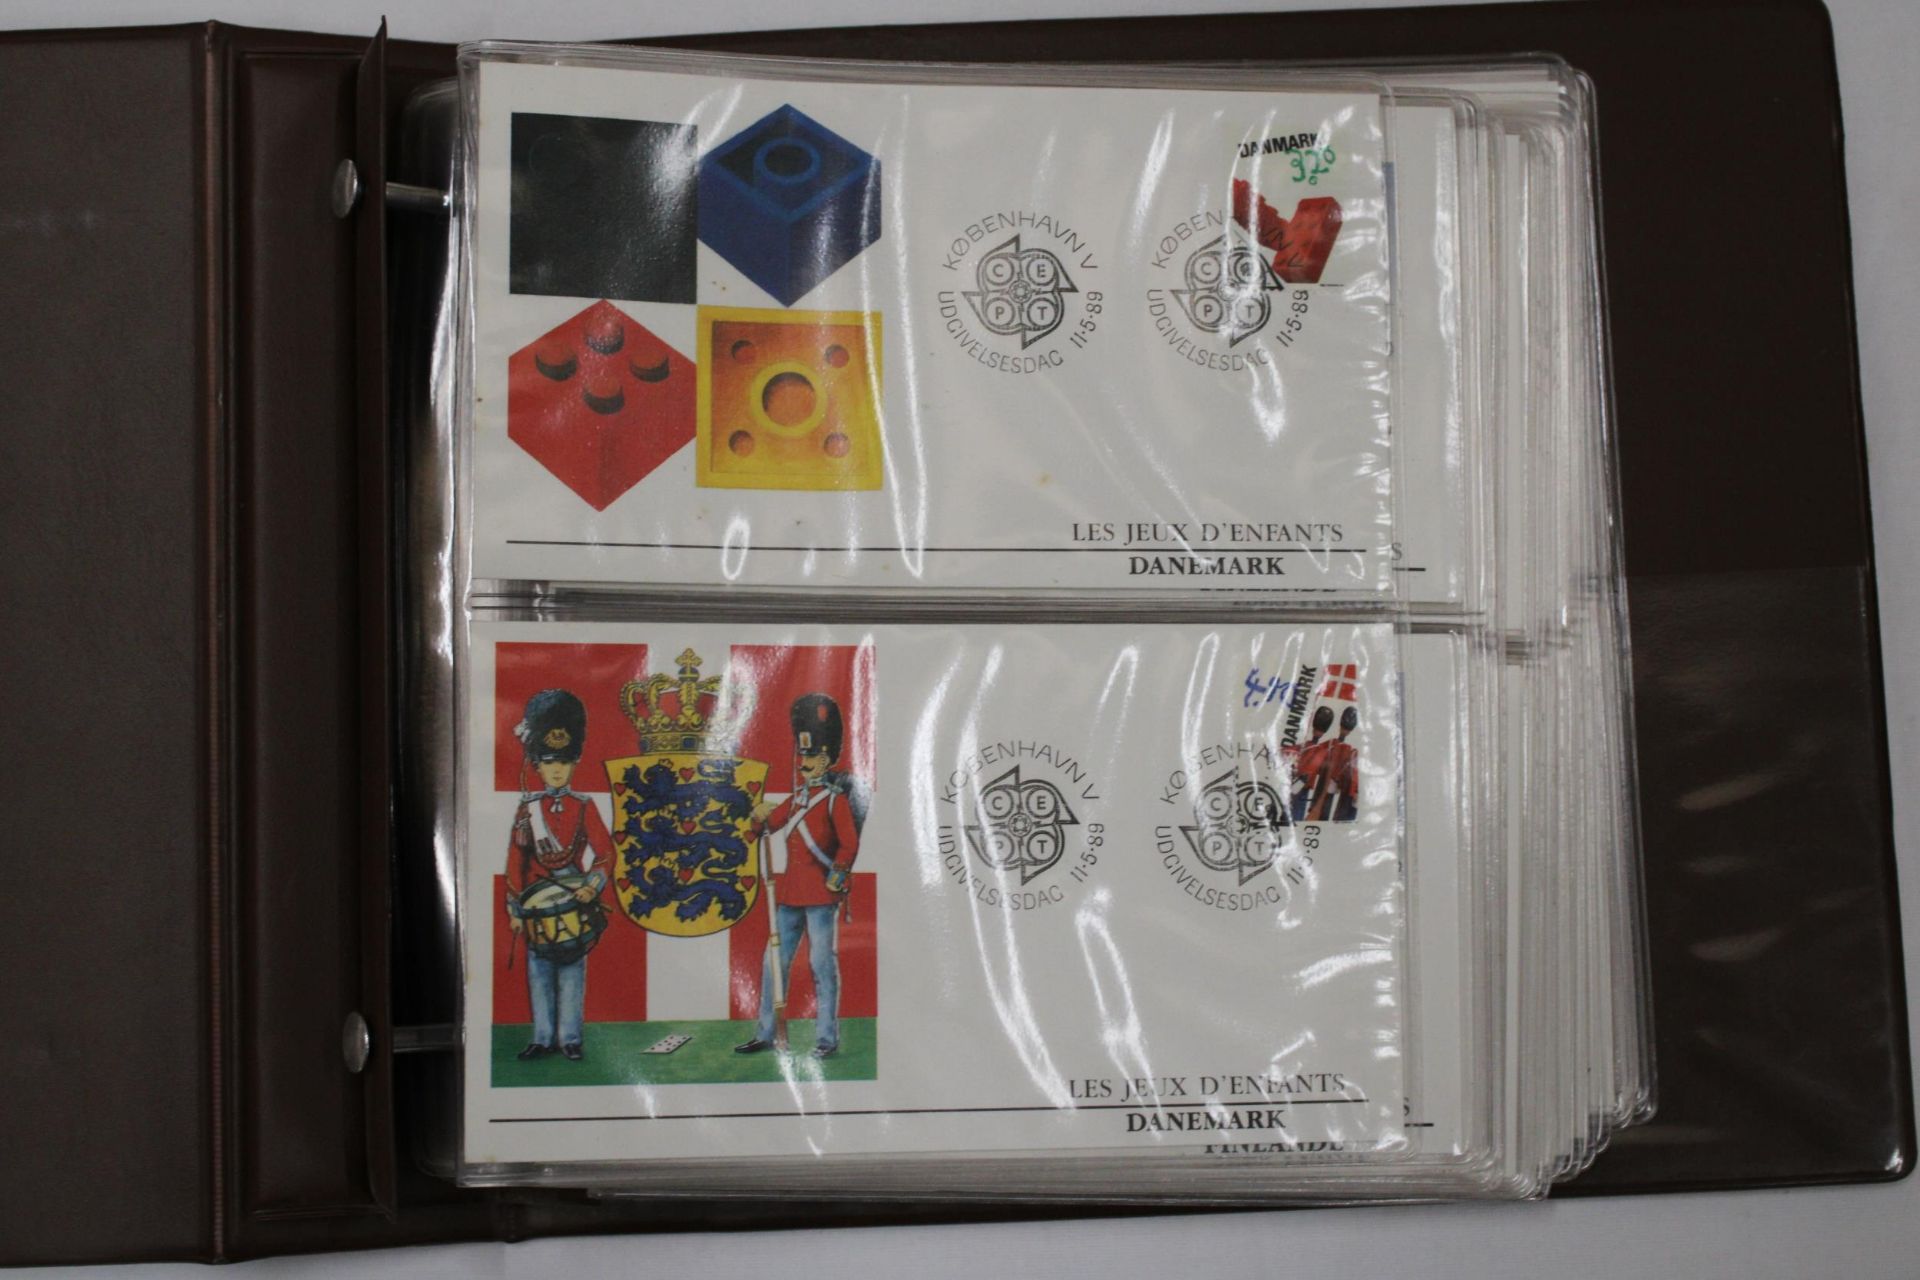 A FULL ALBUM OF FIRST DAY COVERS TO INCLUDE JERSEY LES JEUX D'ENFANTS, SAINT MARIN, 30TH ANNIVERSARY